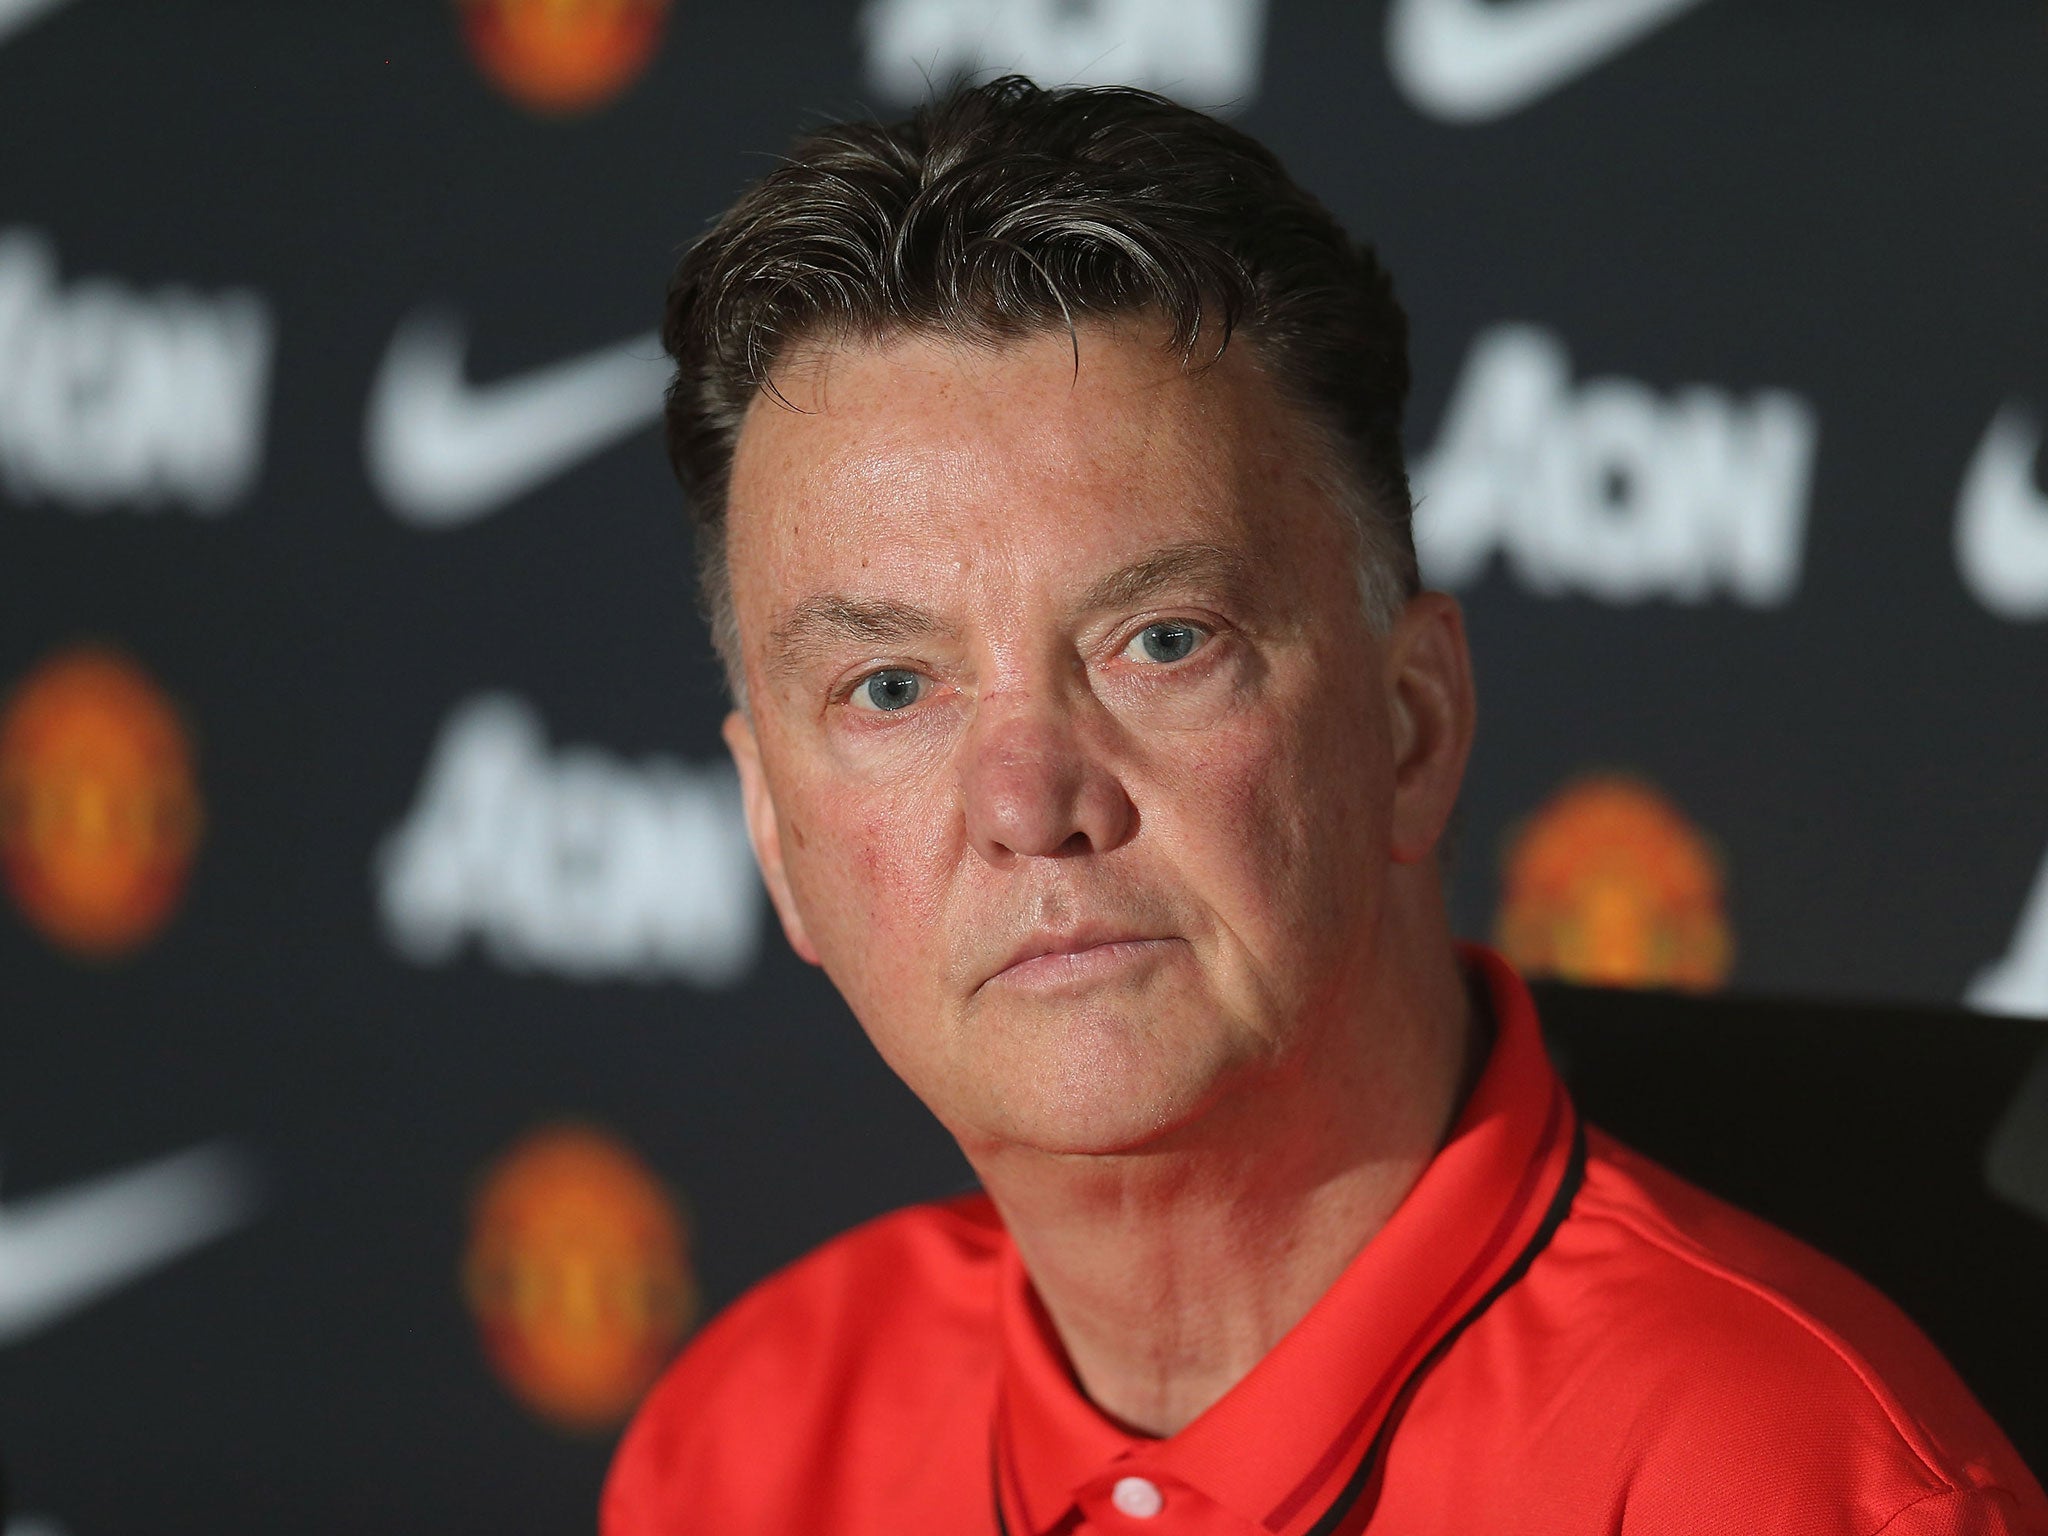 Louis van Gaal believes Manchester United could have won the title this season